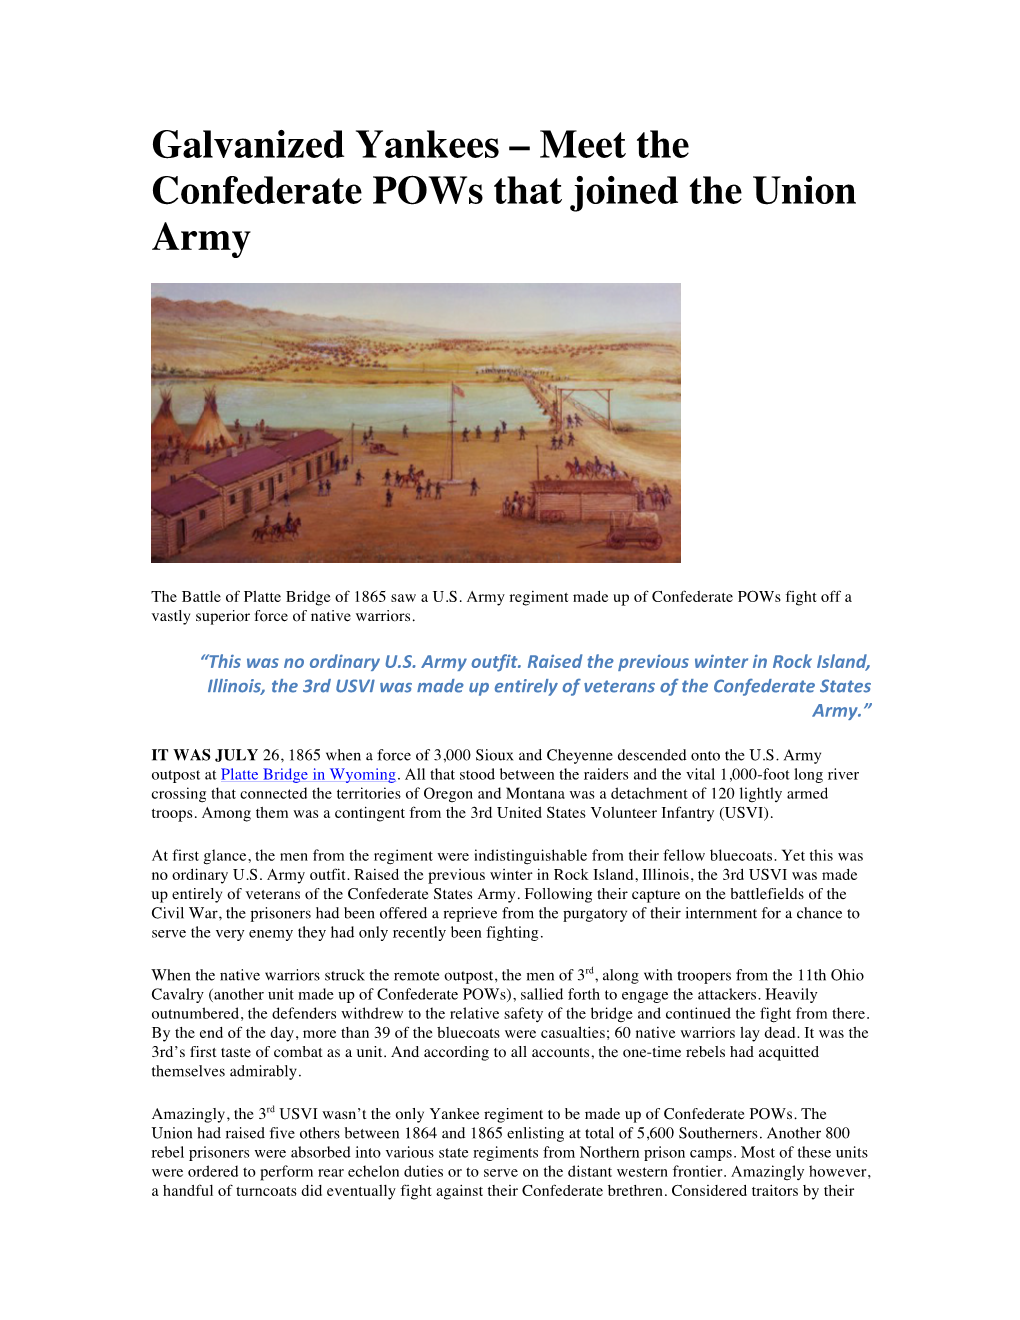 Galvanized Yankees – Meet the Confederate Pows That Joined the Union Army